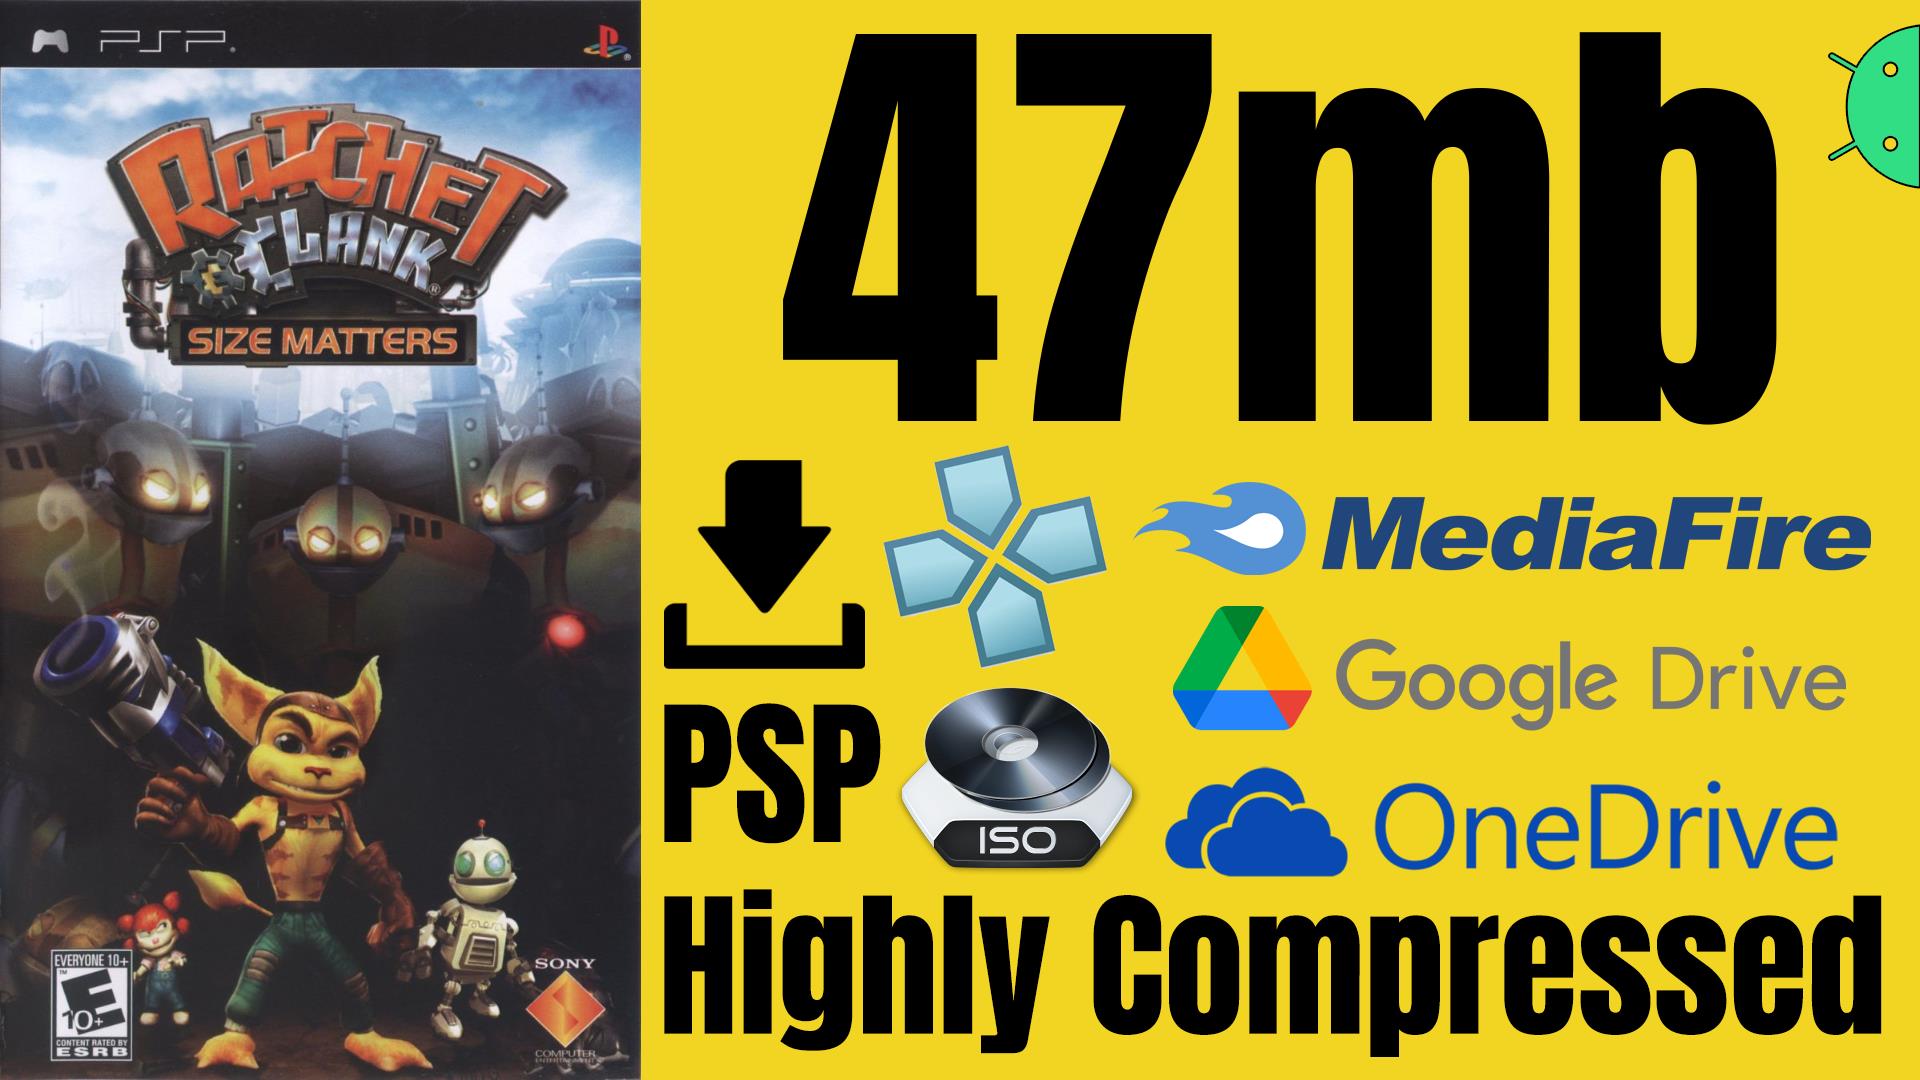 Ratchet & Clank Size Matters PSP ISO Highly Compressed Game Download